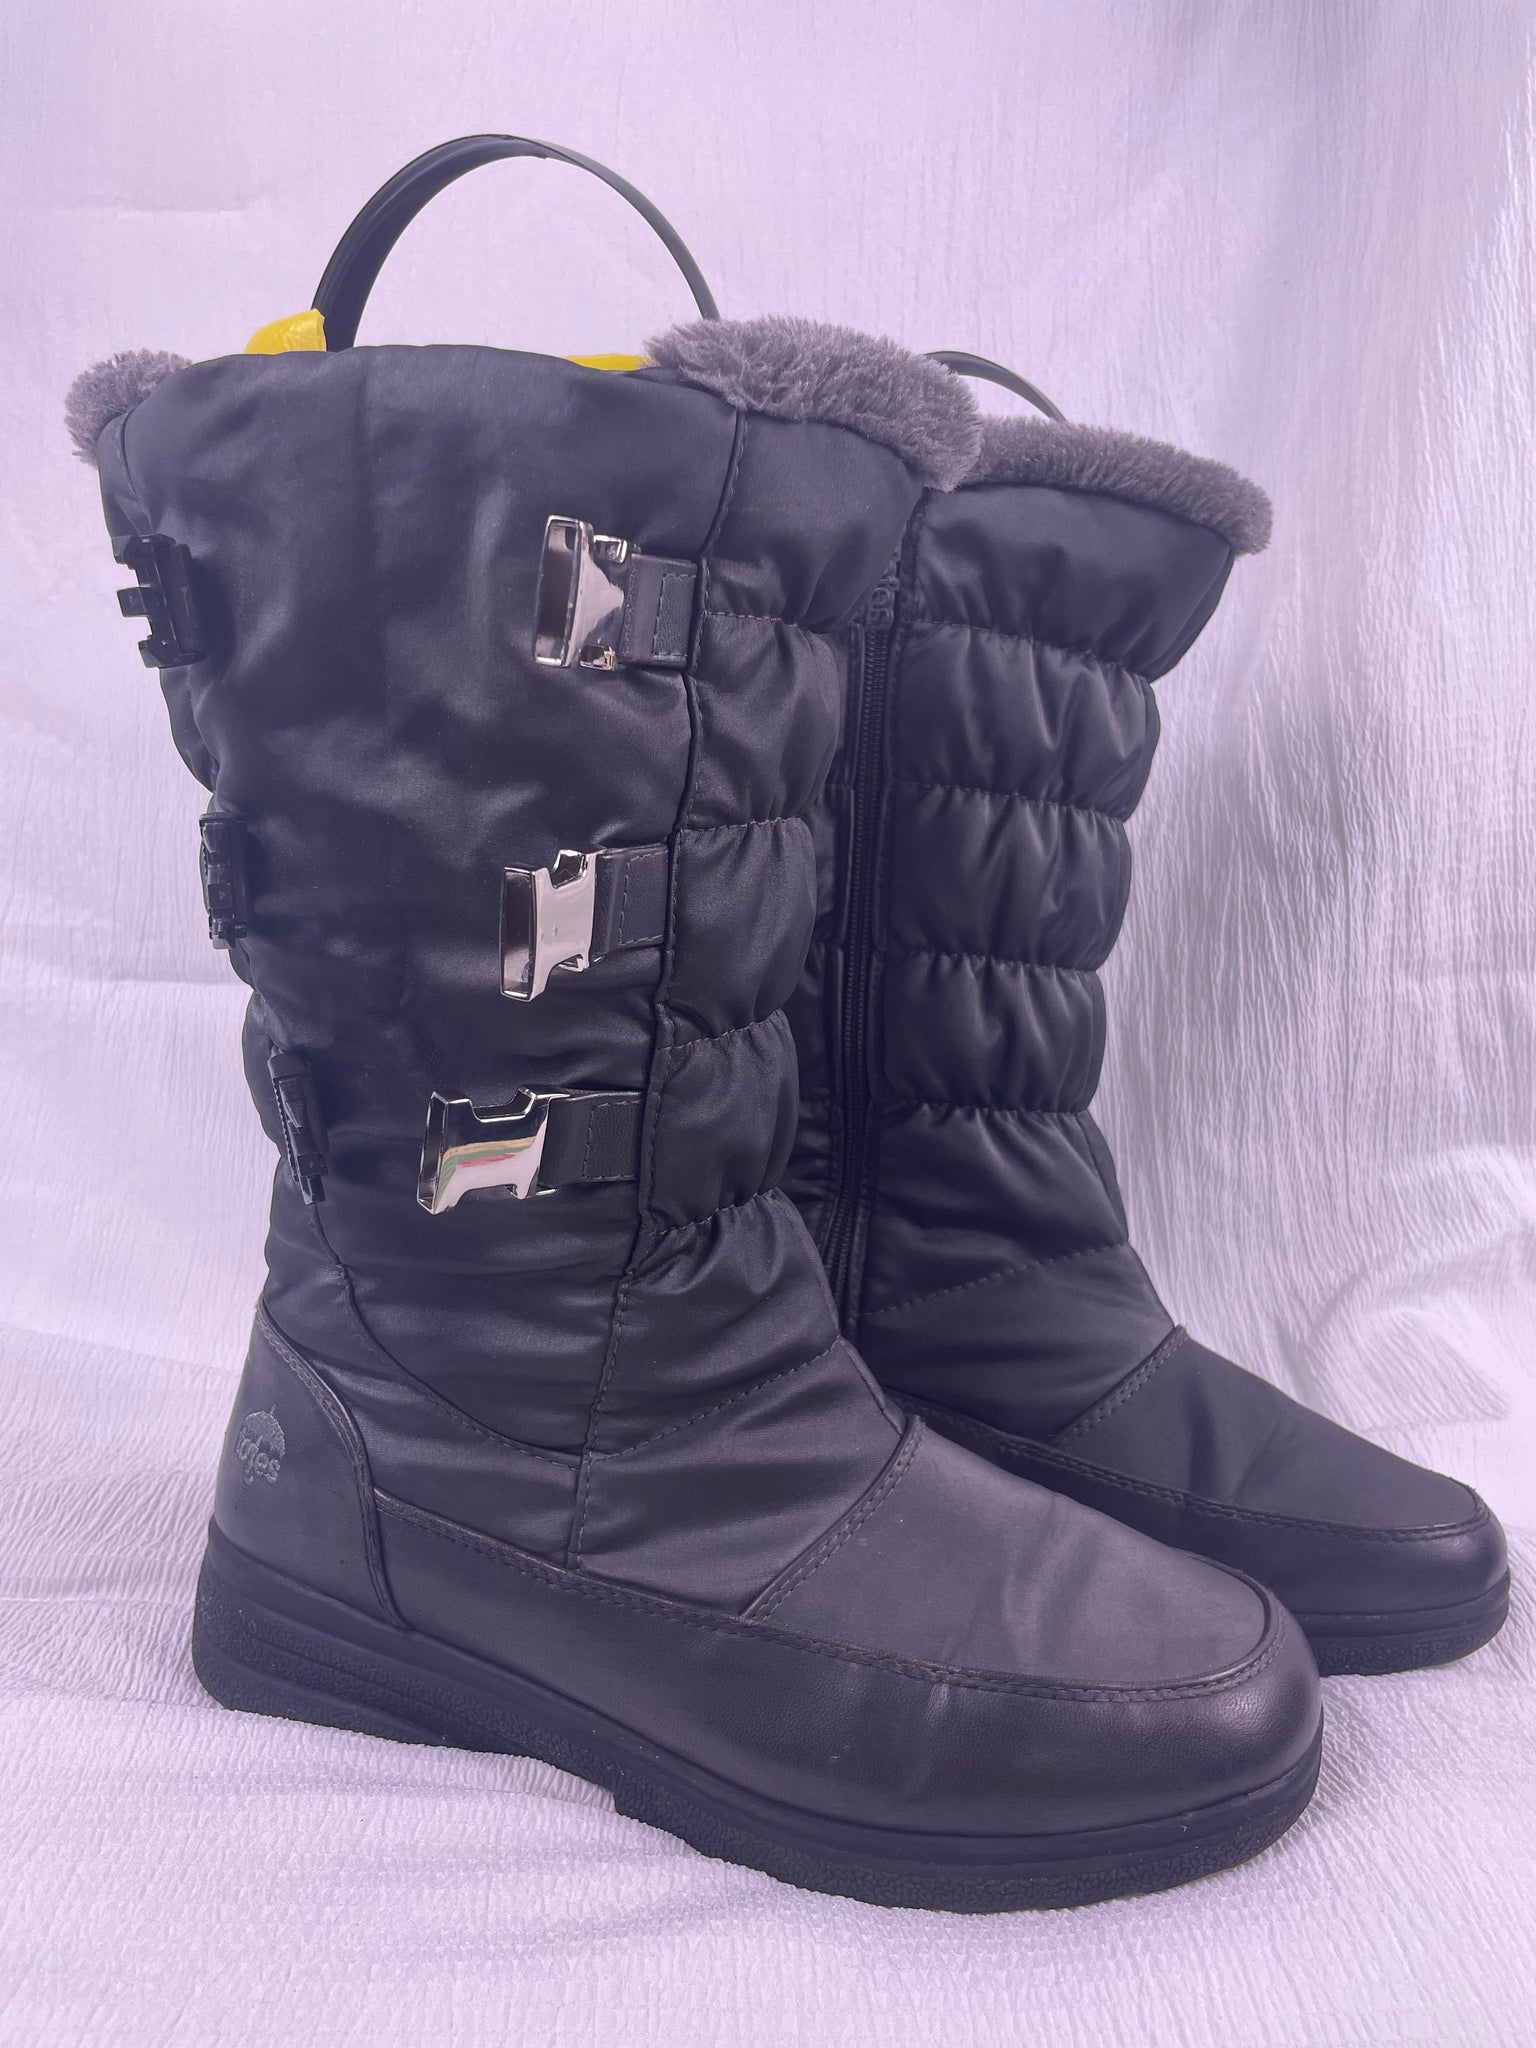 Totes waterproof Bryce boots, Size 10